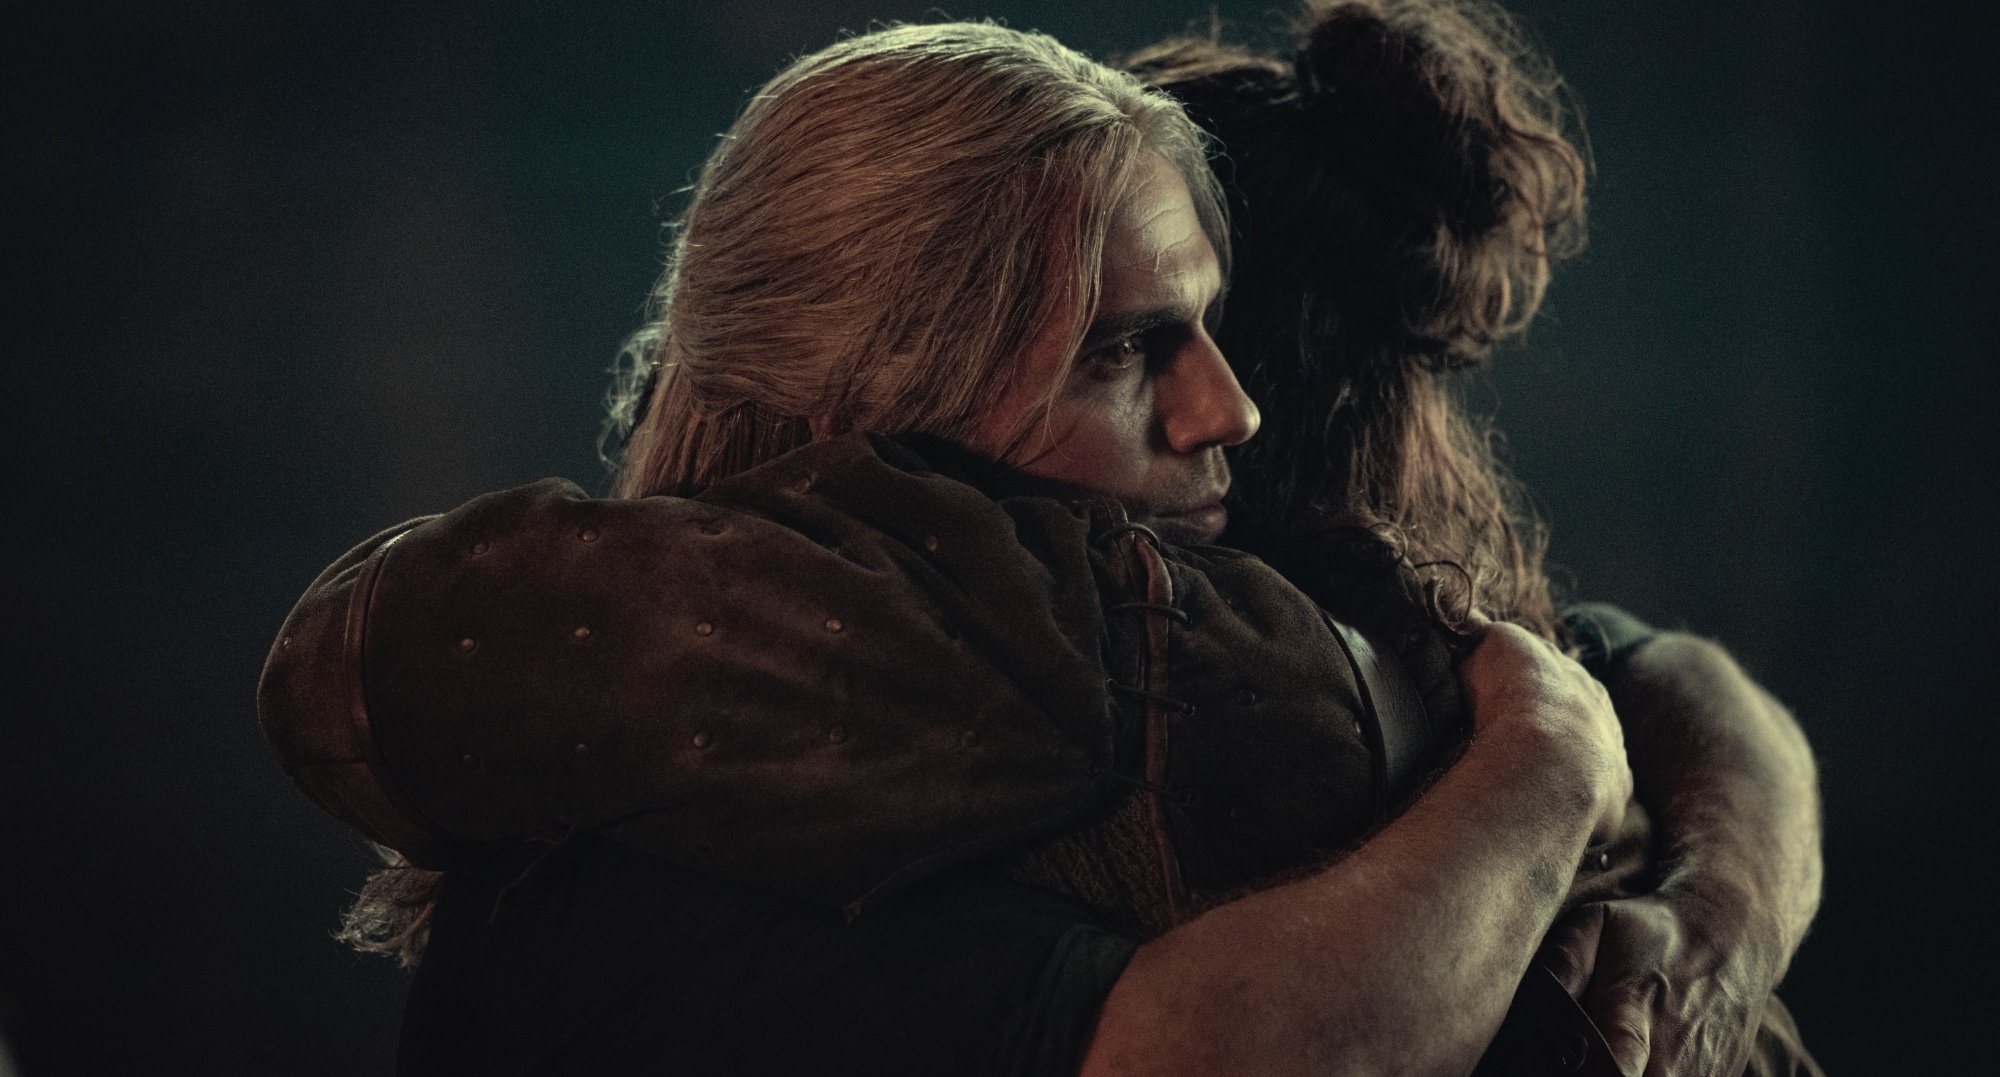 The Witcher' Writers Are Already Mapping Out Season 4